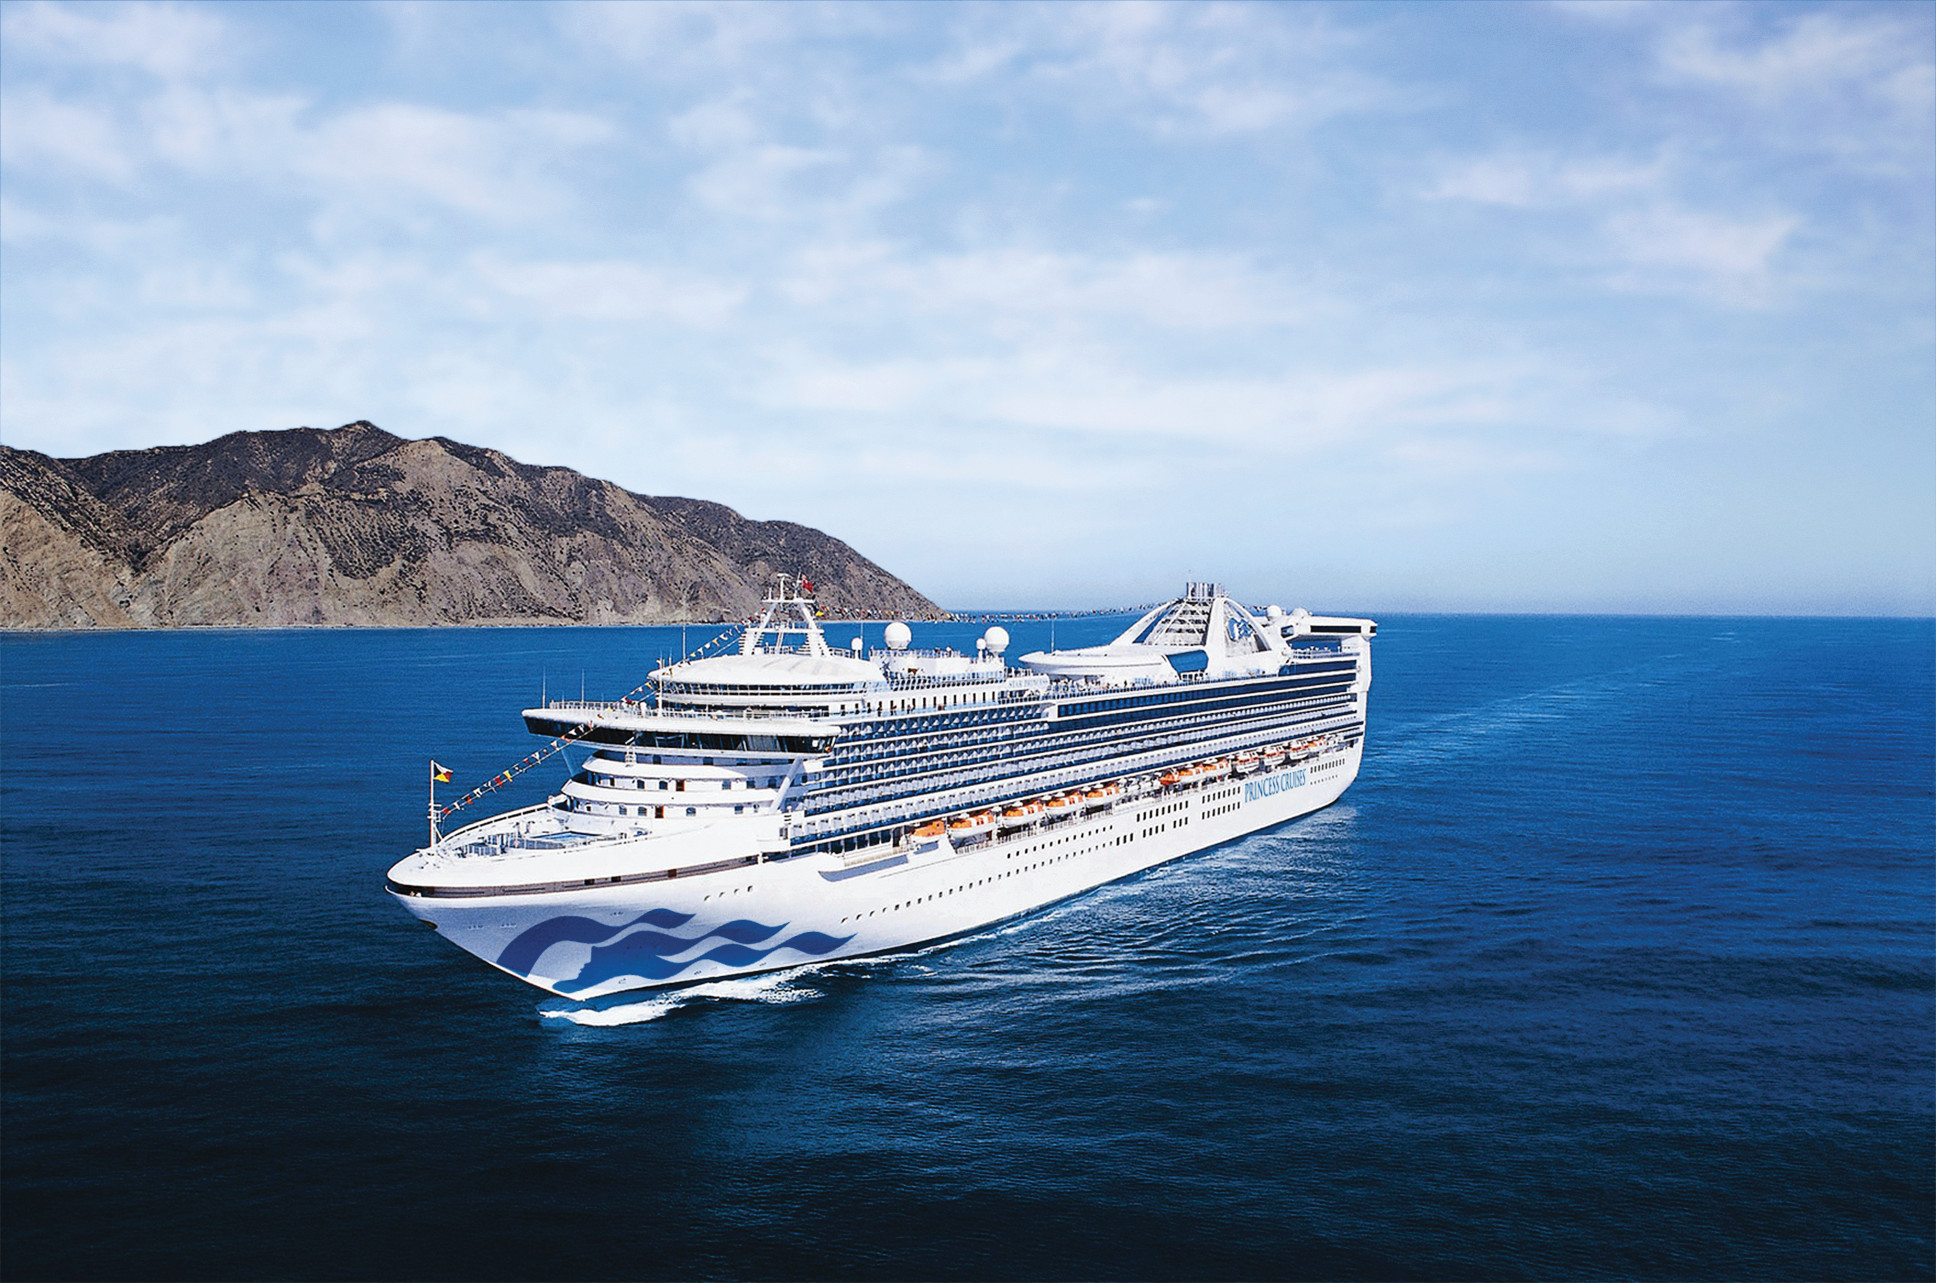 Cruise Destinations – Take a Cruise to the Caribbean with Princess Cruises, the Original Love Boat